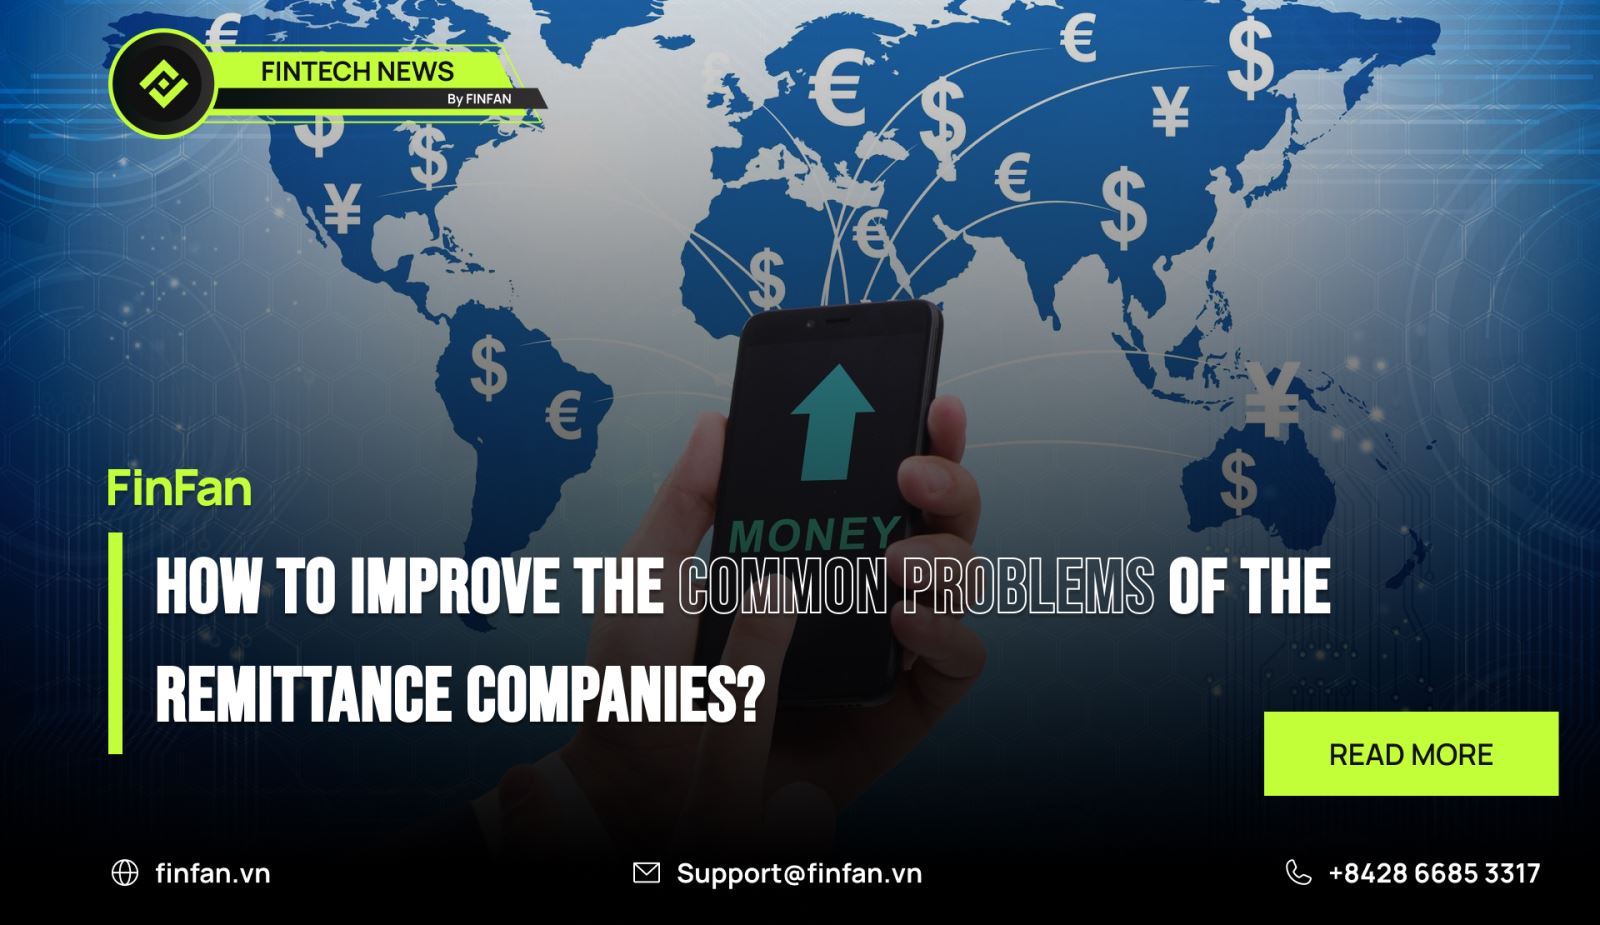 How to improve the common problems of the remittance companies?